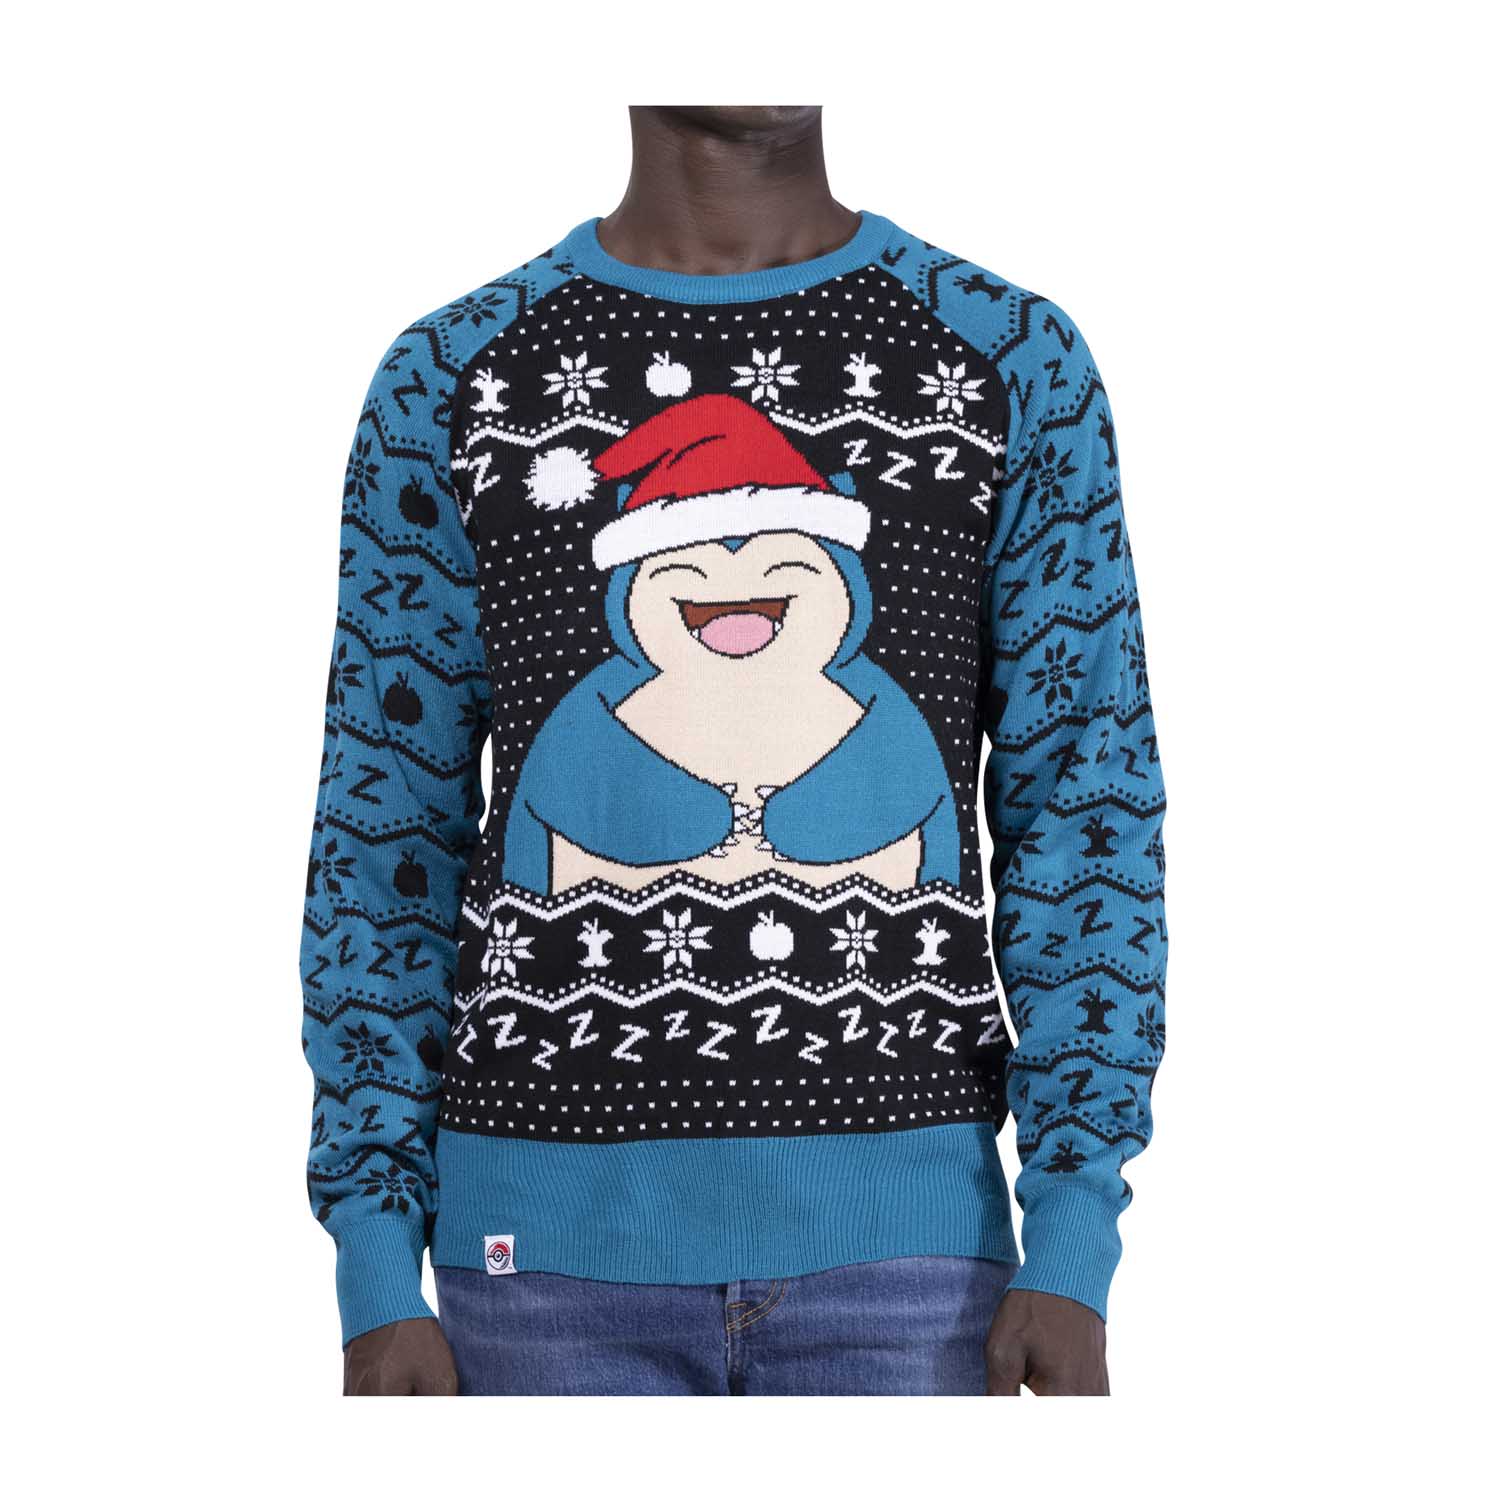 Snorlax Holiday Knit Sweater 1 6a62.jpg